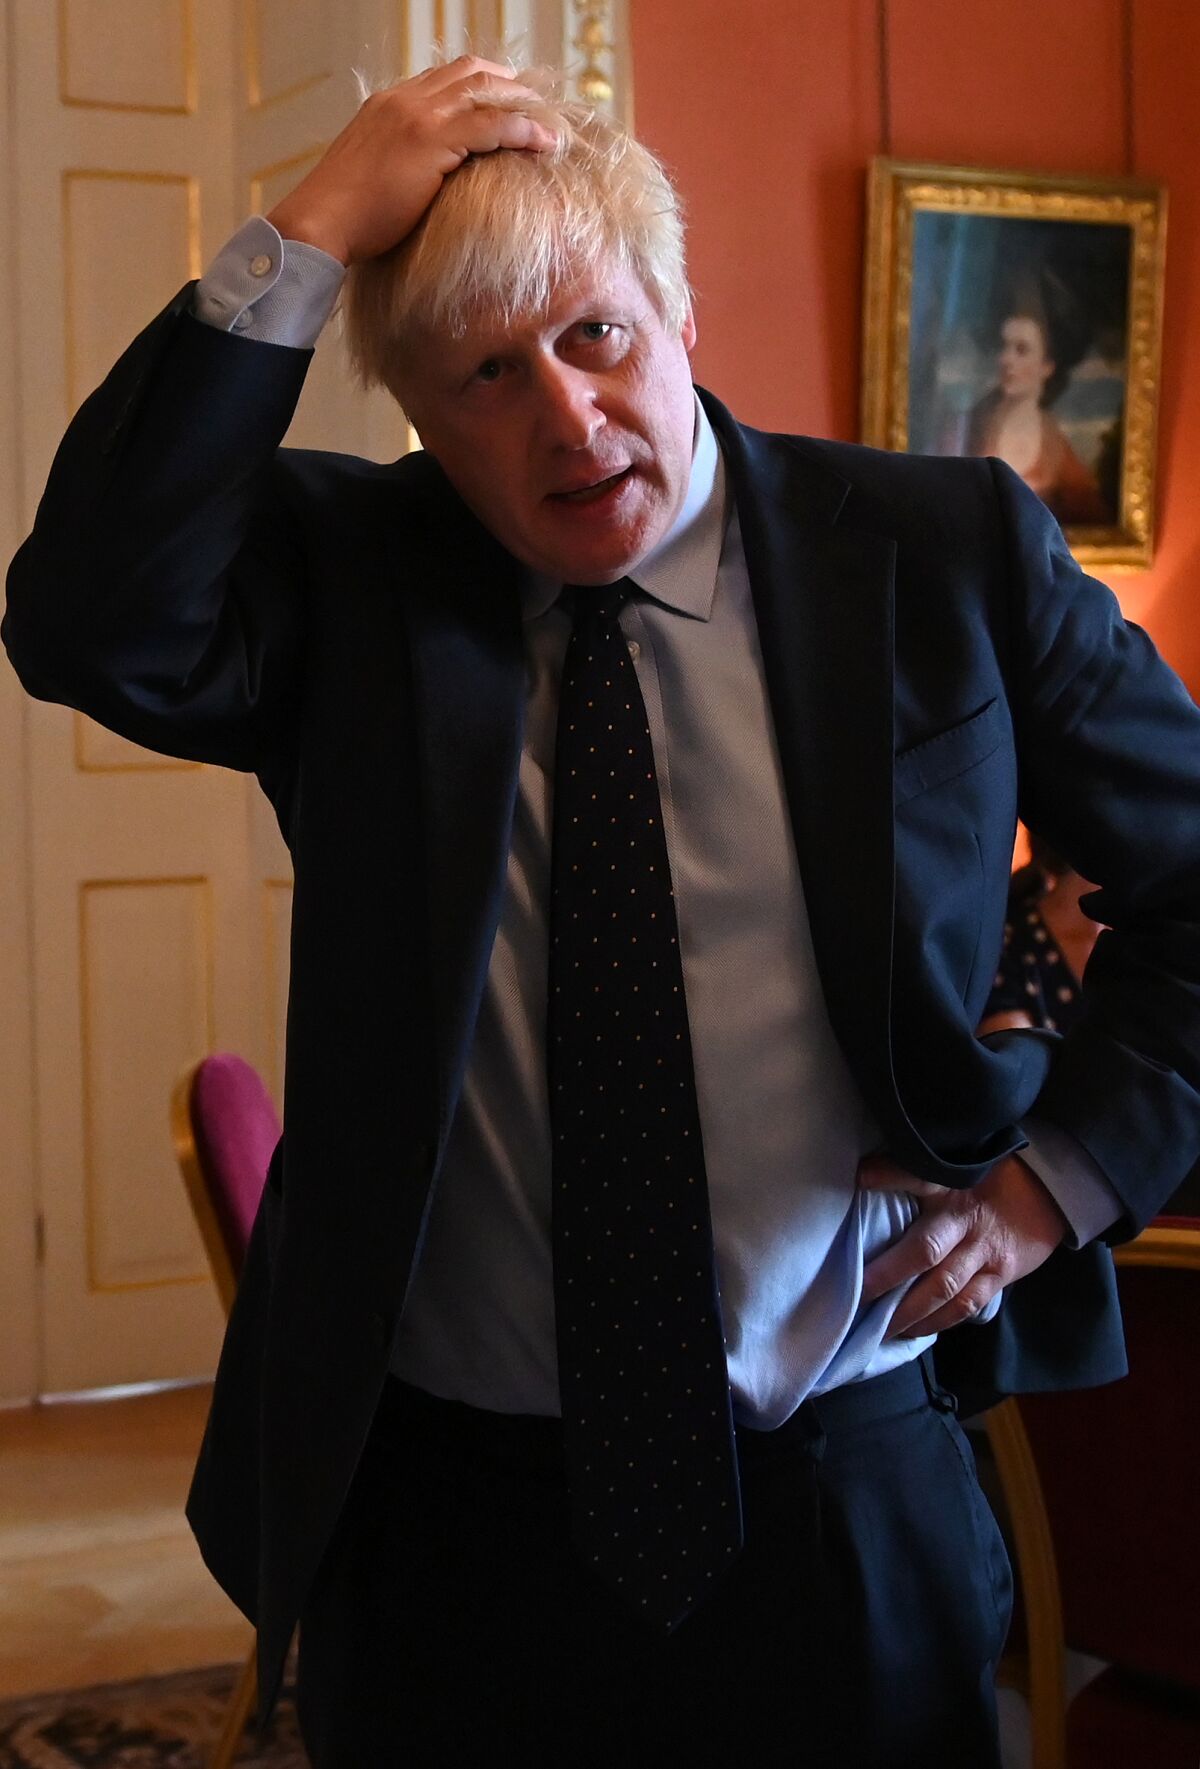 How's this for great television? Prime Minister Boris Johnson fought Parliament — and Parliament won.